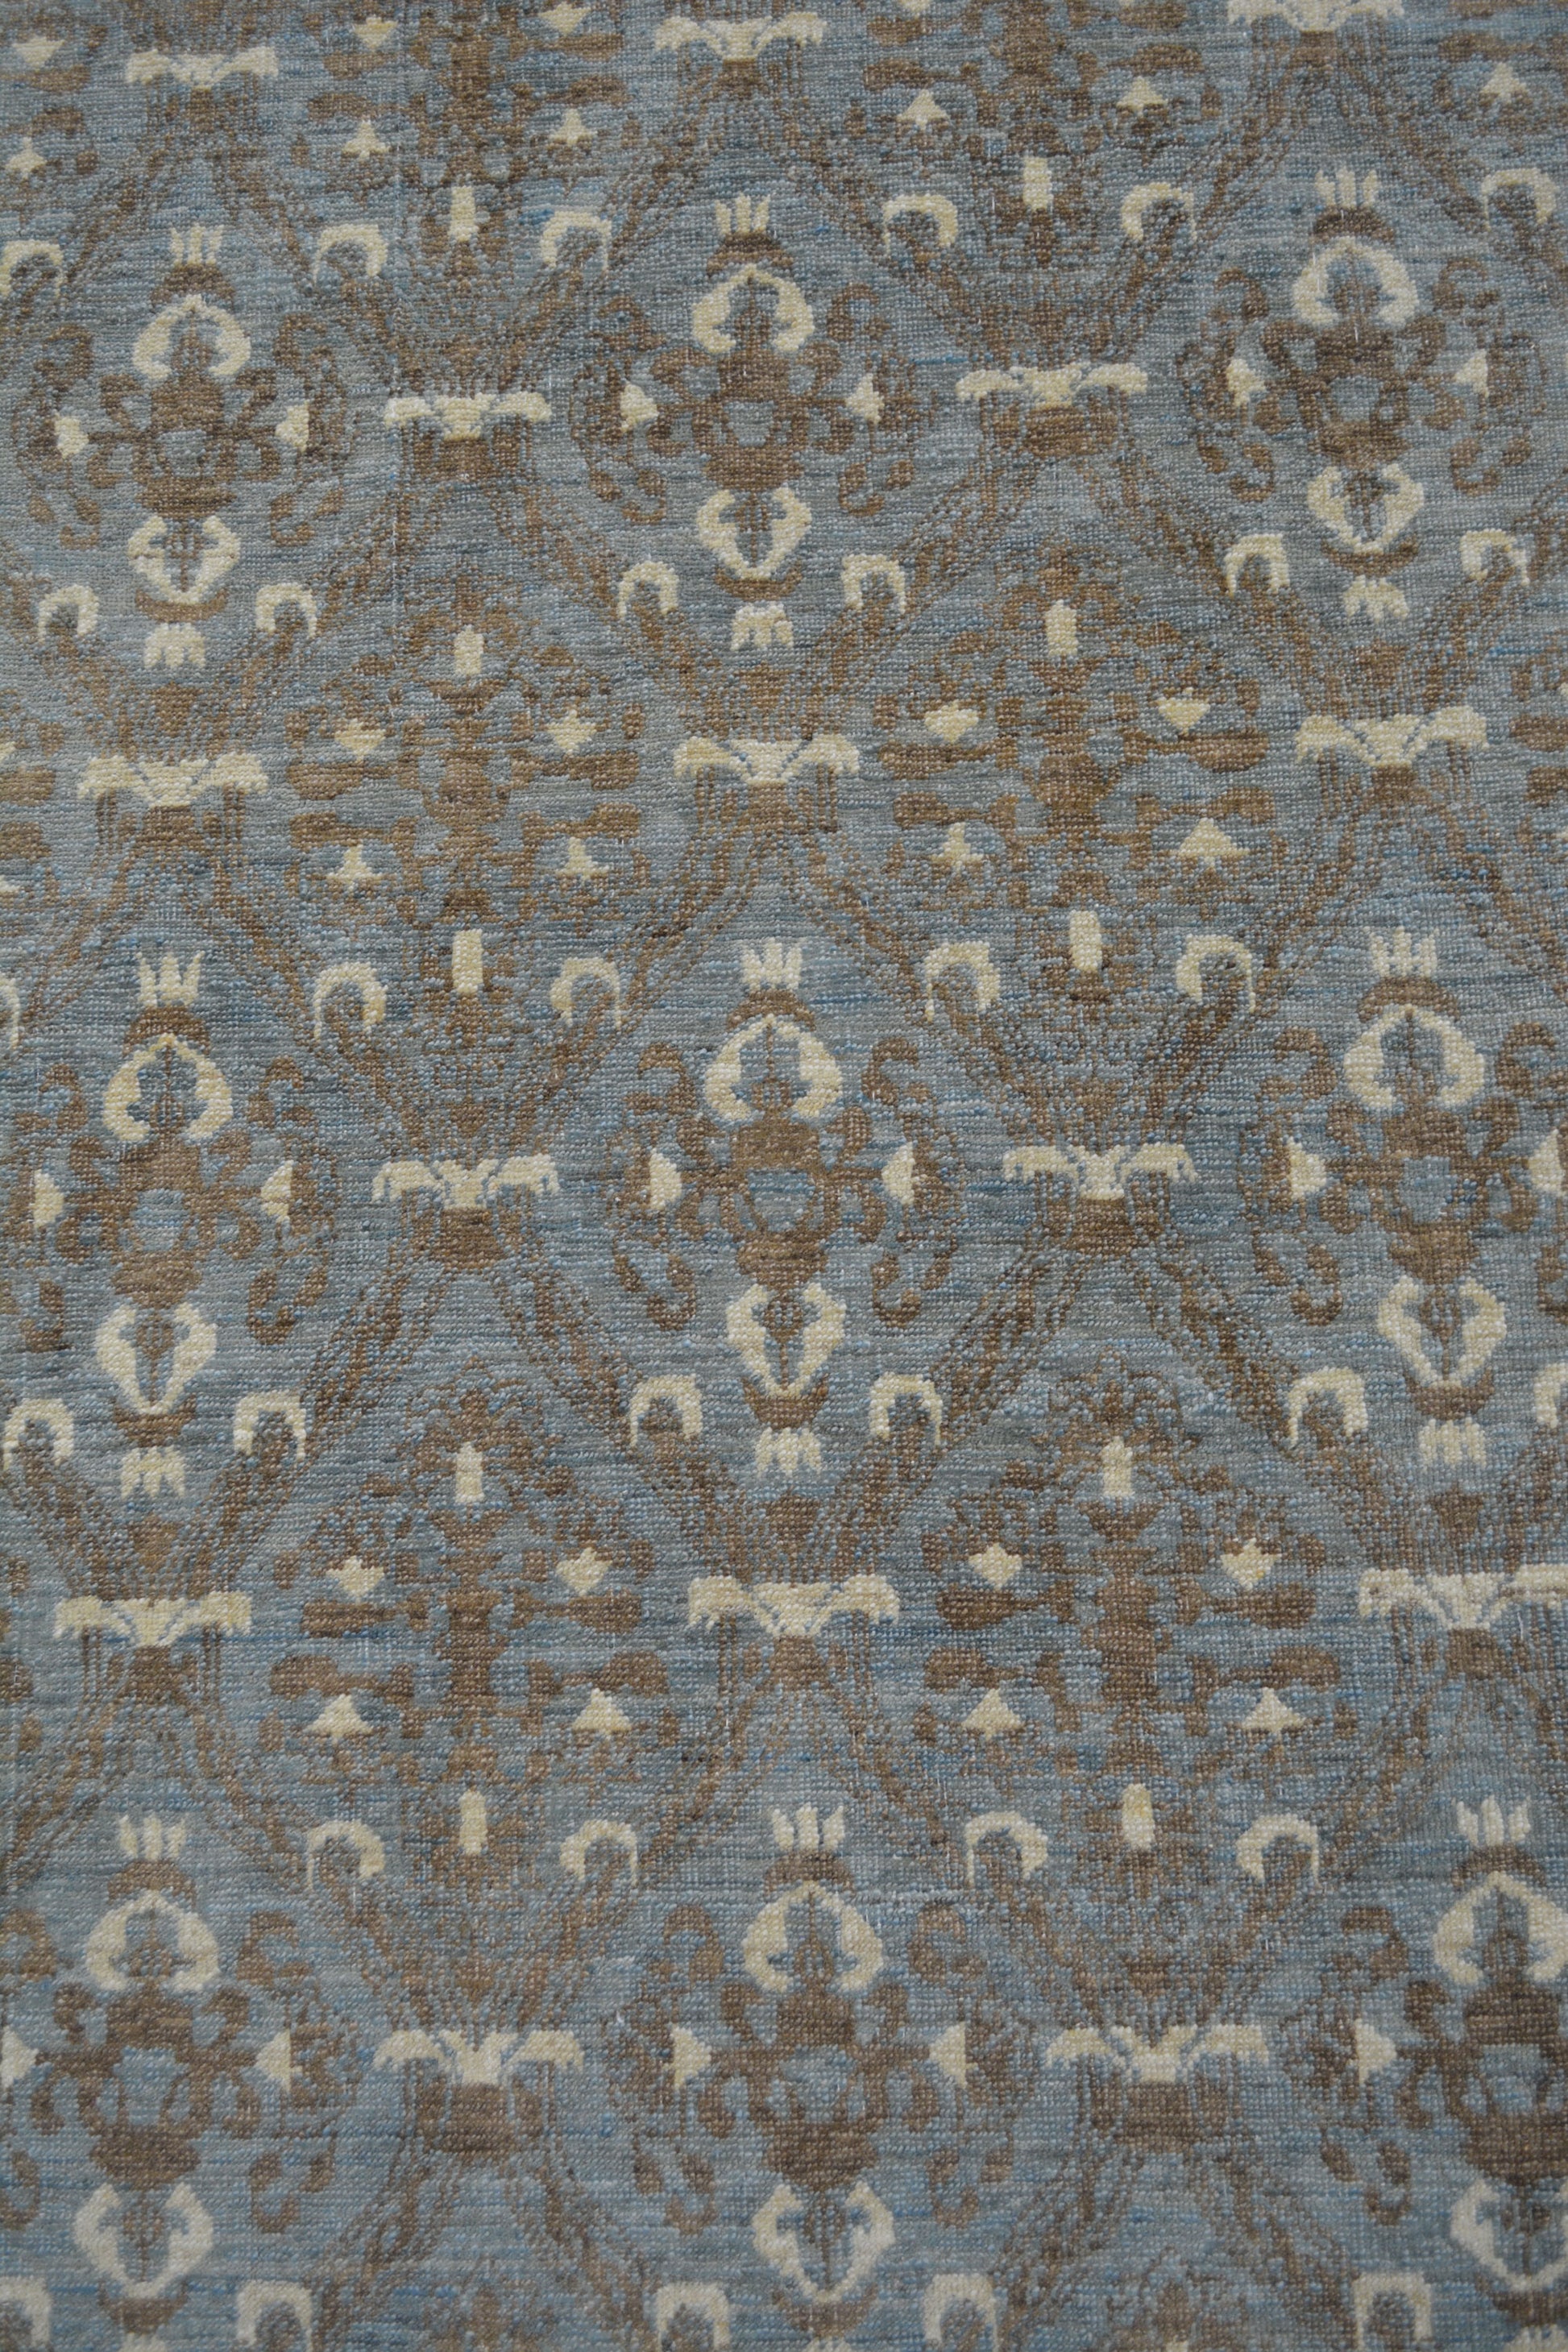 The center of the rug features the candelabrums, and ornaments organized symmetrically. 